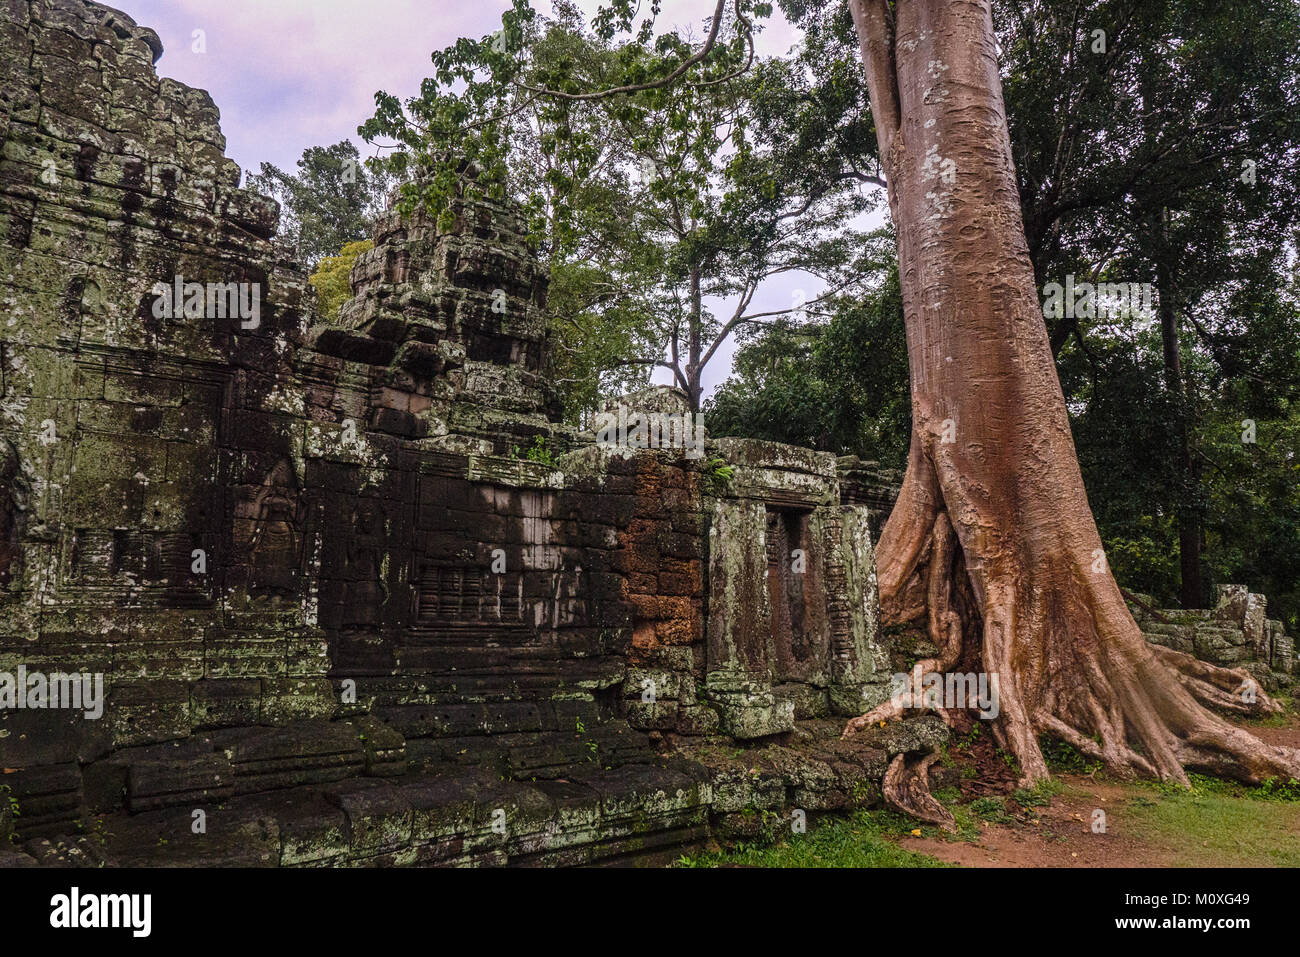 Banteay Kdei Temple tree grows through wall at Angkor Wat in Siem Reap, Cambodia Stock Photo